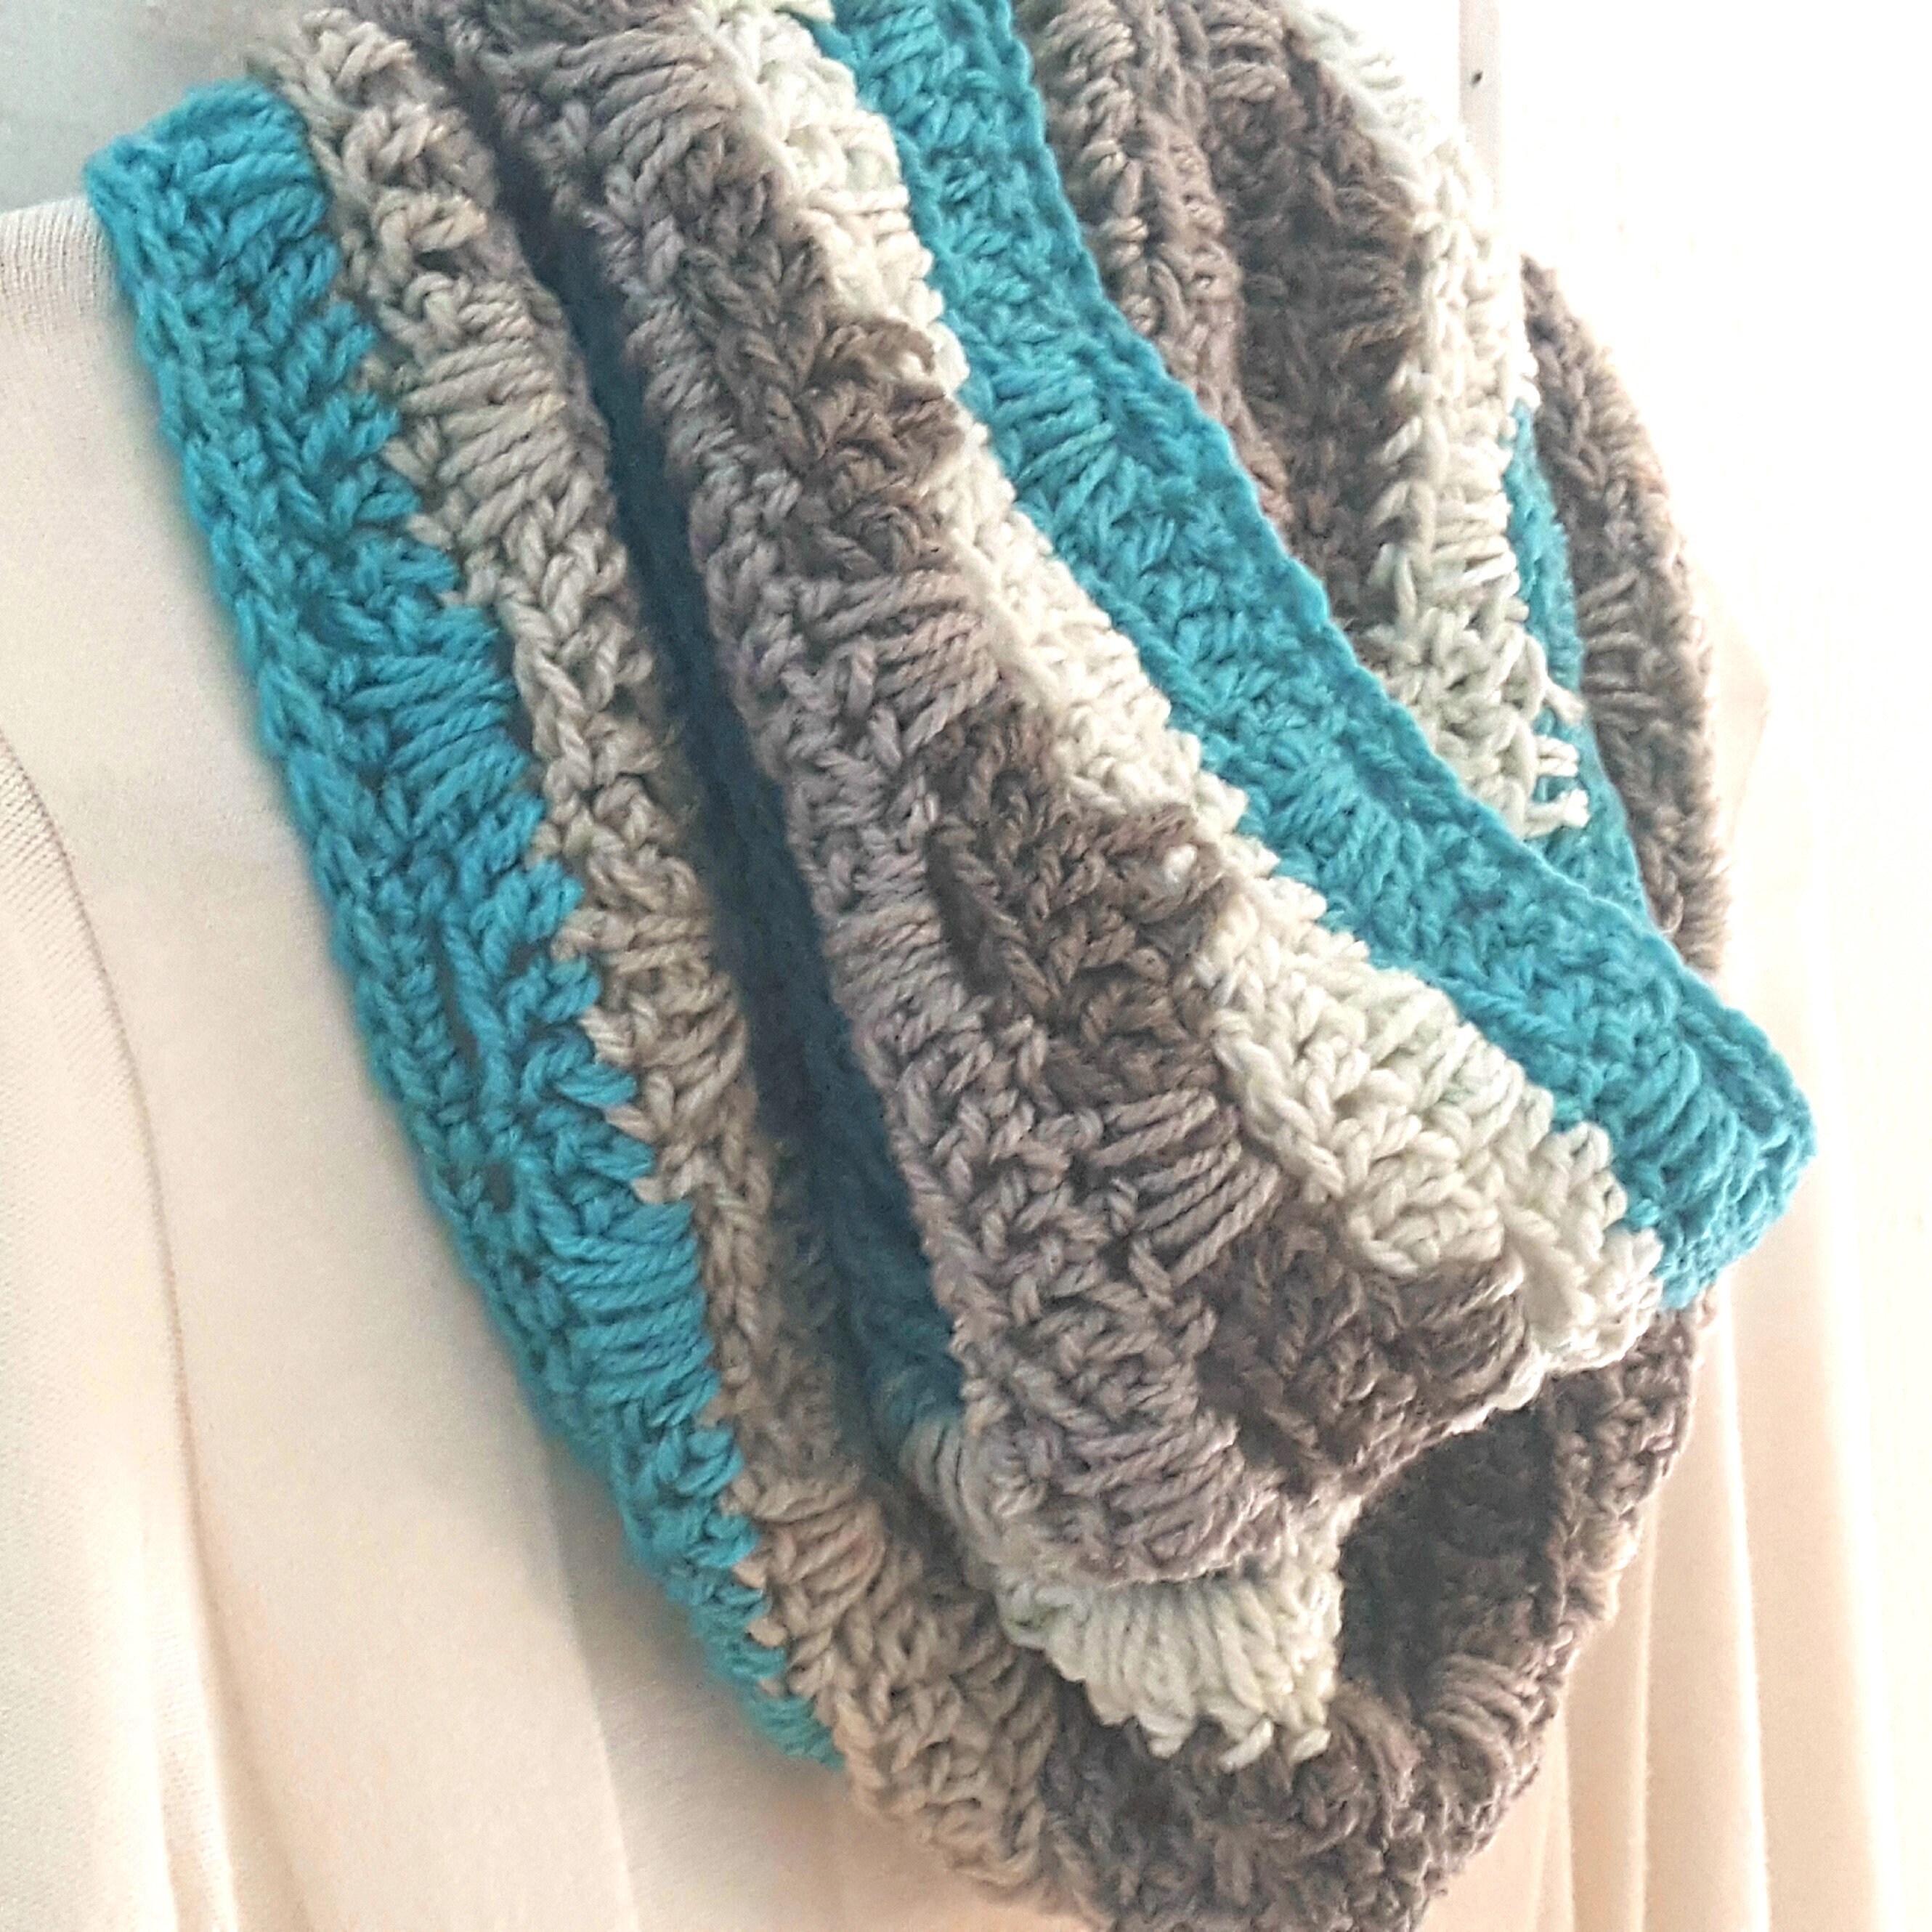 Blanket or scarf pattern for Caron Cloud cake? : r/crochet